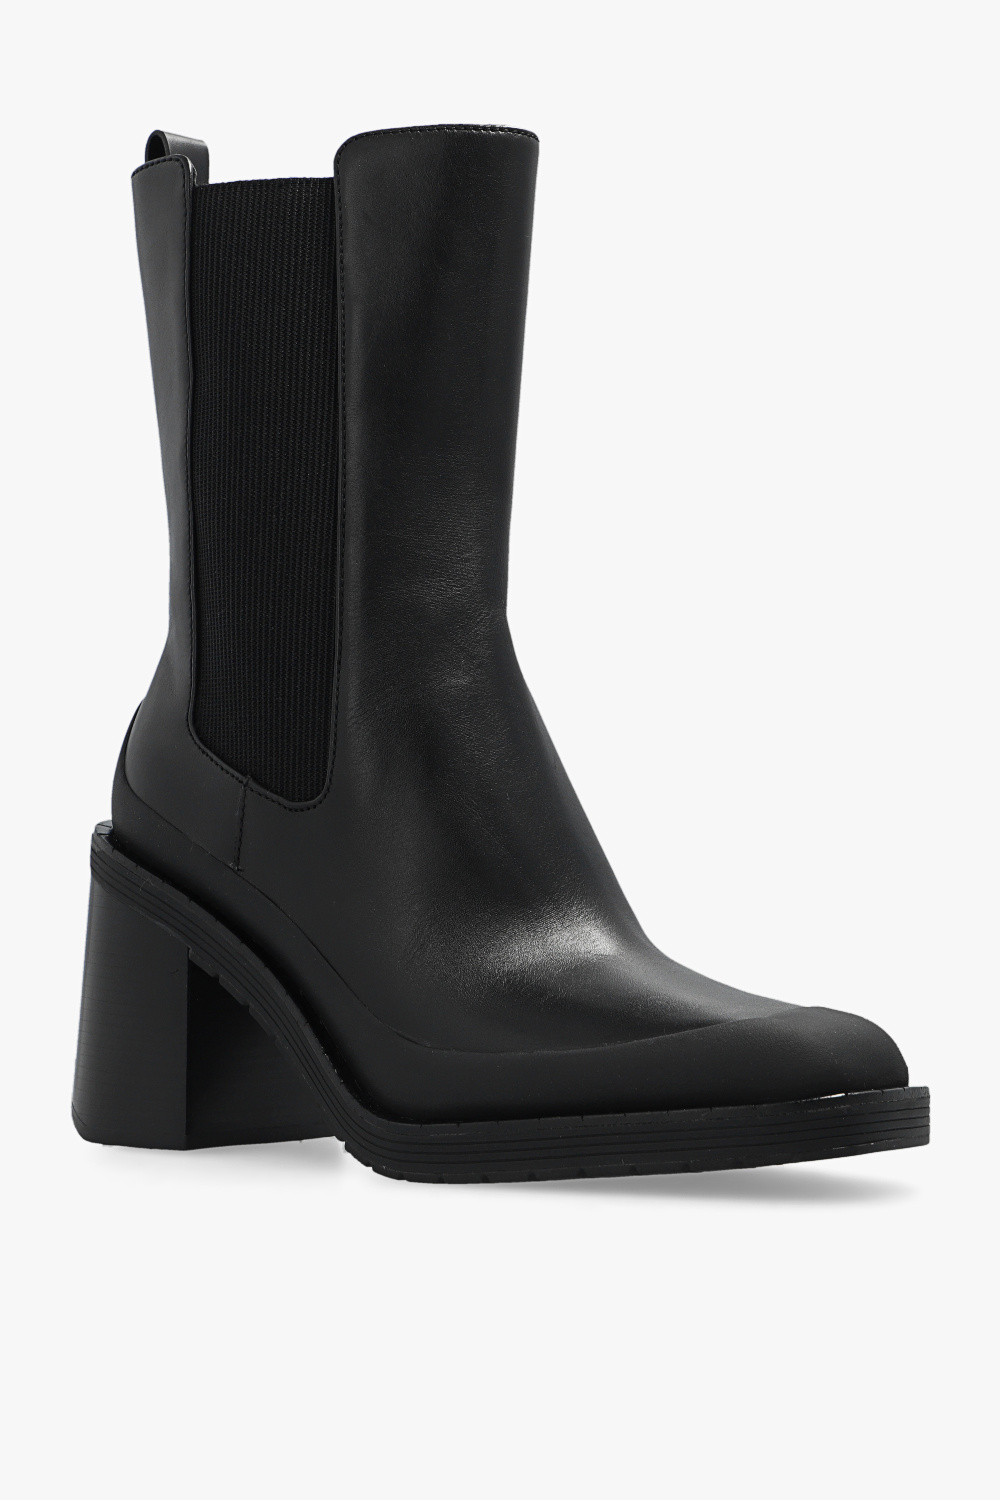 Tory Burch ‘Expedition’ heeled ankle boots